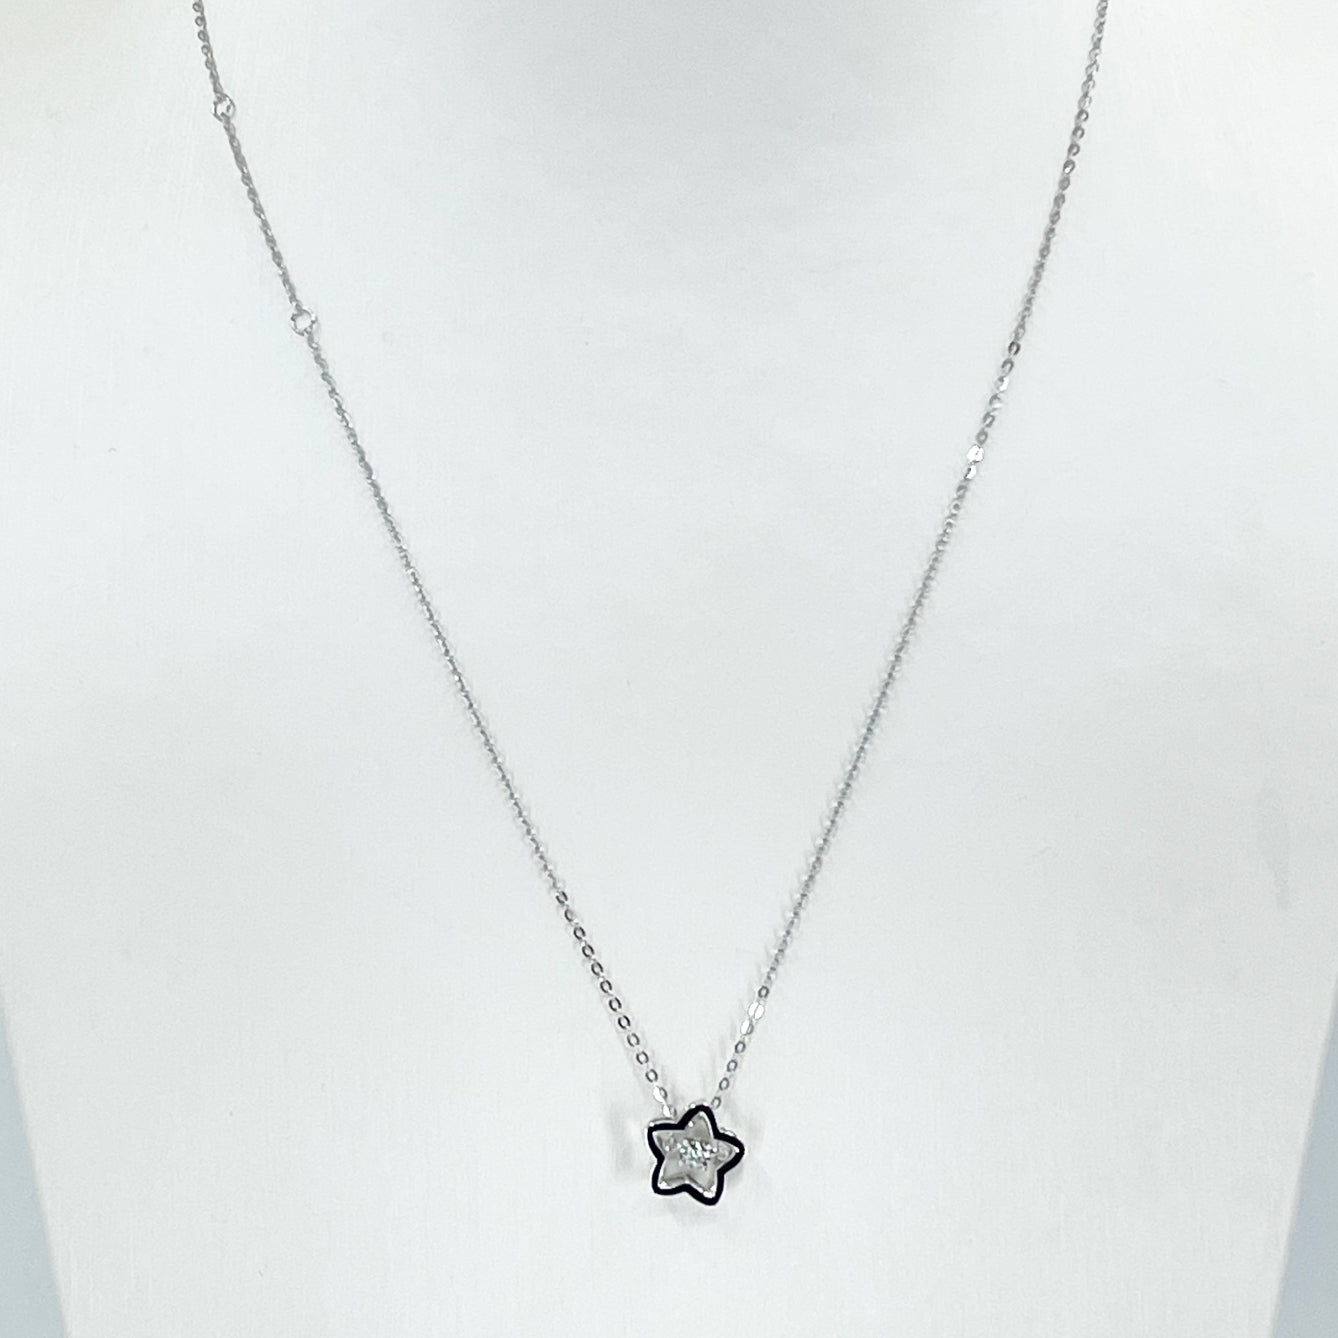 18K Solid White Gold Round Link Chain Necklace with Diamond Star Pendant 18